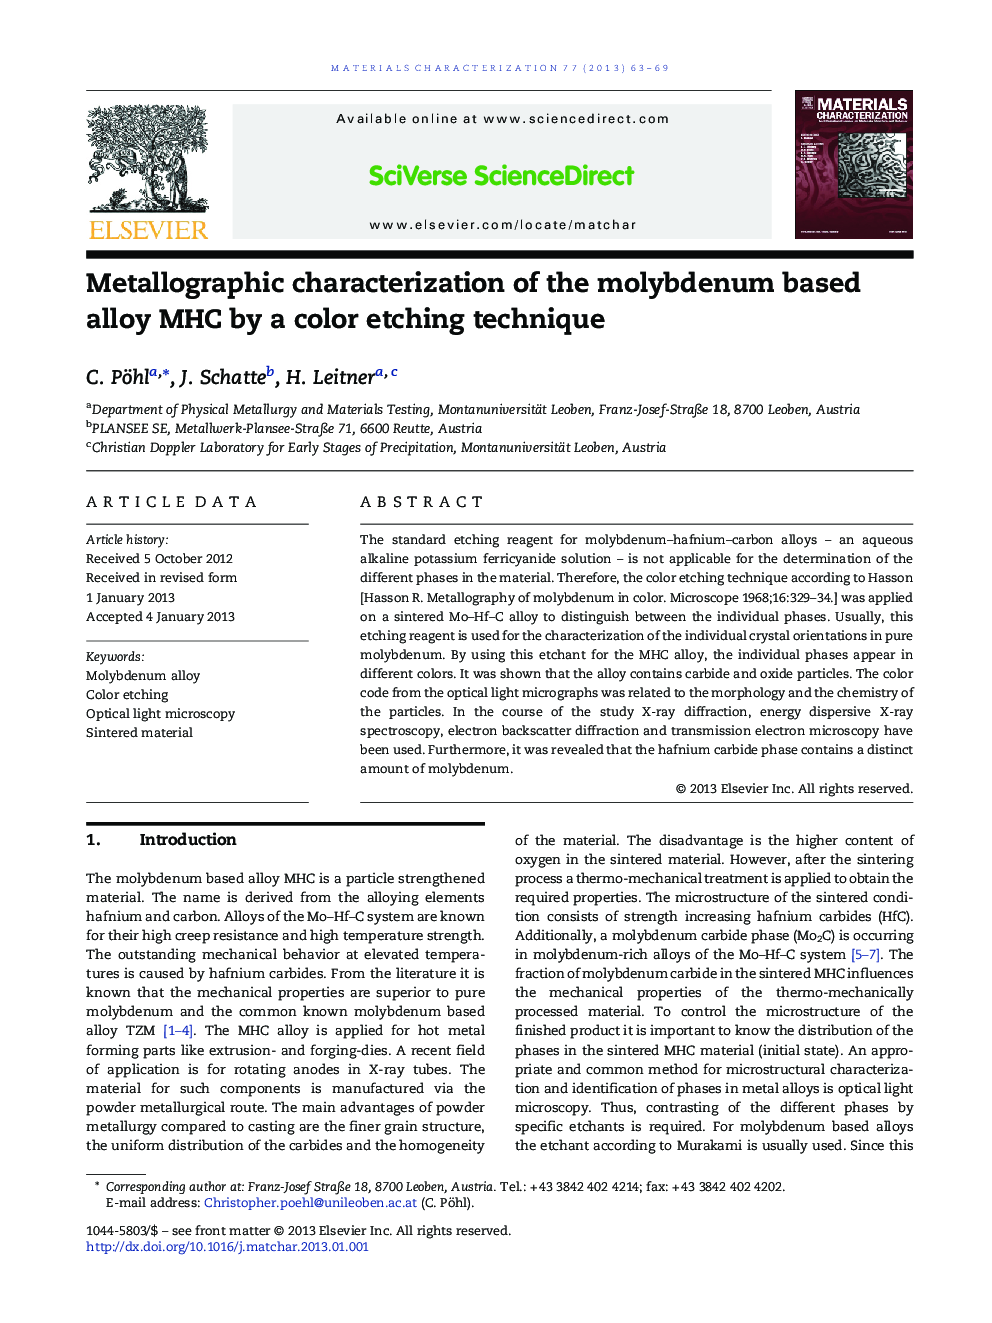 Metallographic characterization of the molybdenum based alloy MHC by a color etching technique